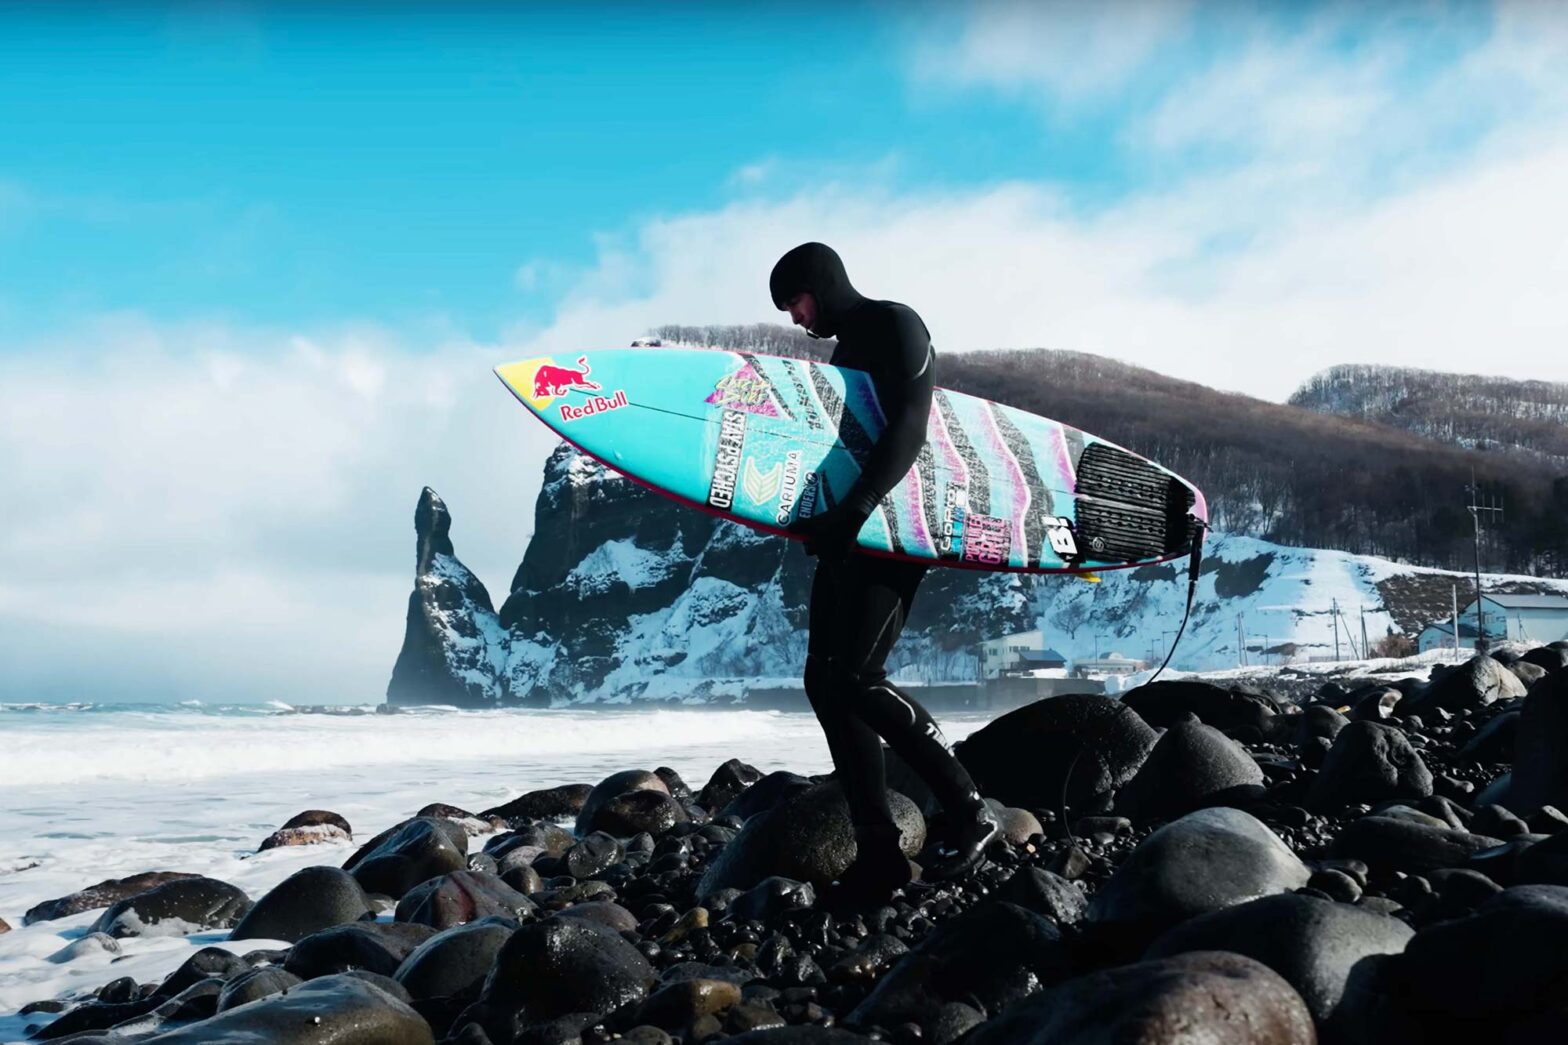 Watch Jamie O’Brien surf and snowboard on the same day in Japan.